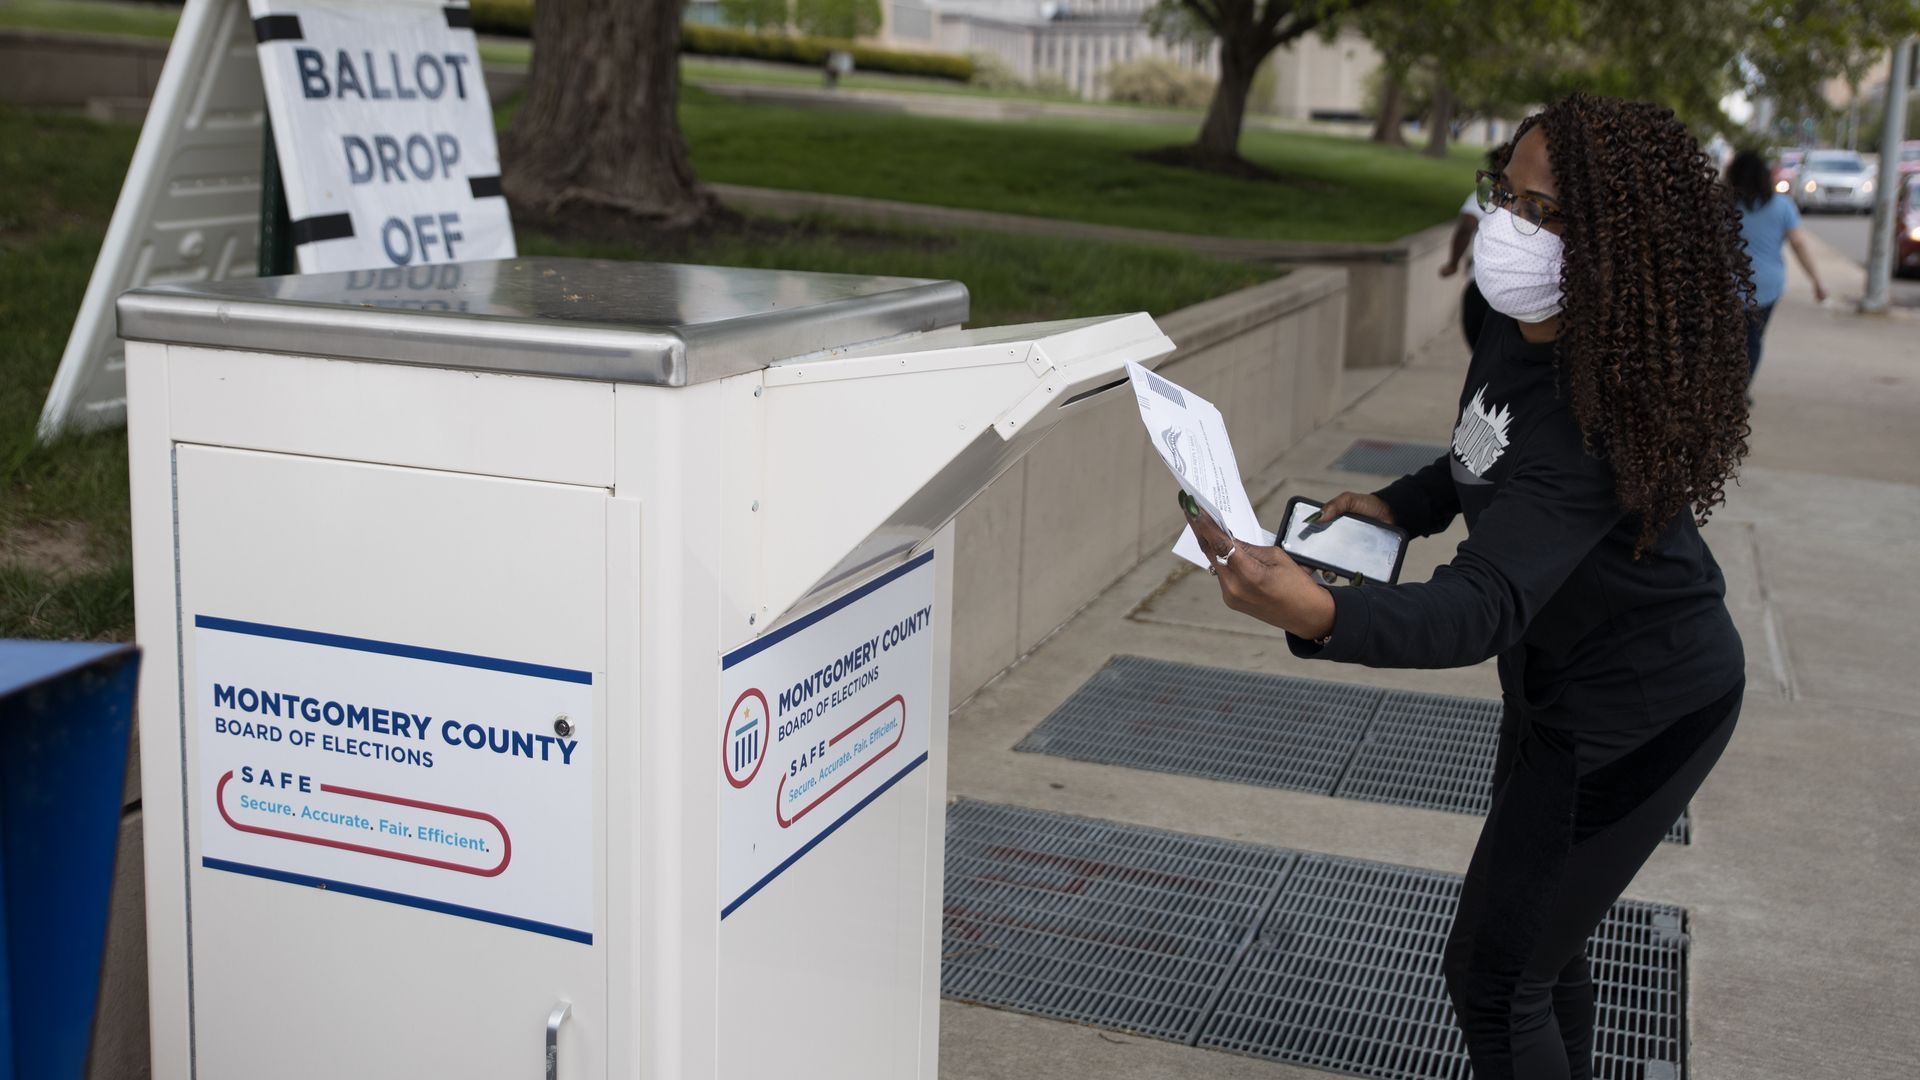 An Ohio voter drops off her ballot at the Board of Elections in Dayton, Ohio on April 28